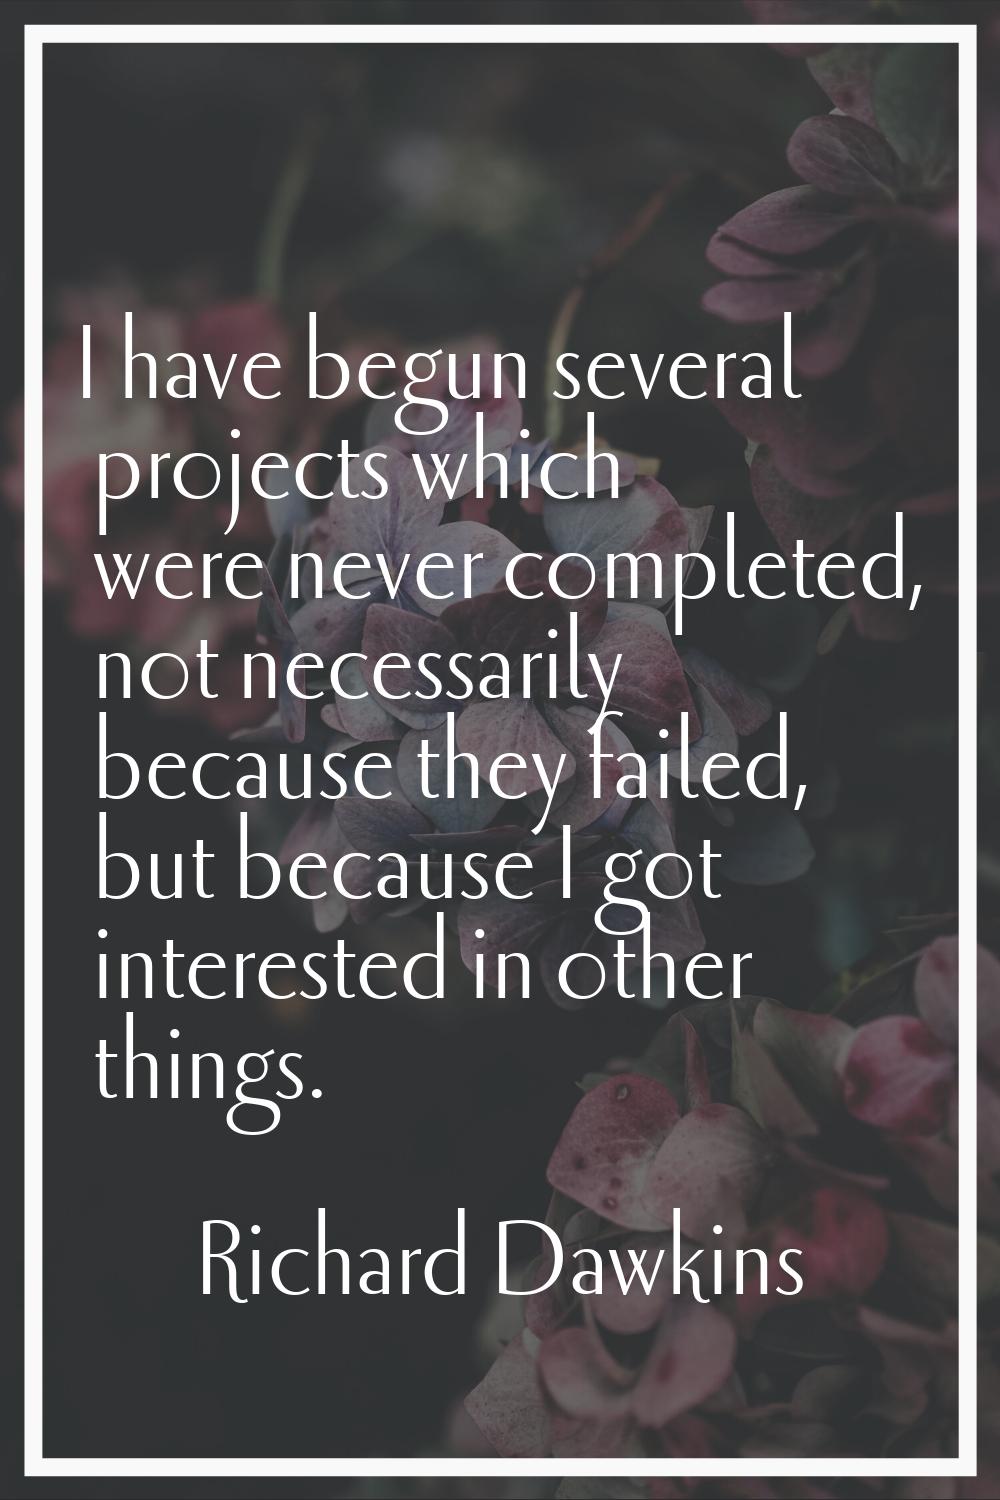 I have begun several projects which were never completed, not necessarily because they failed, but 